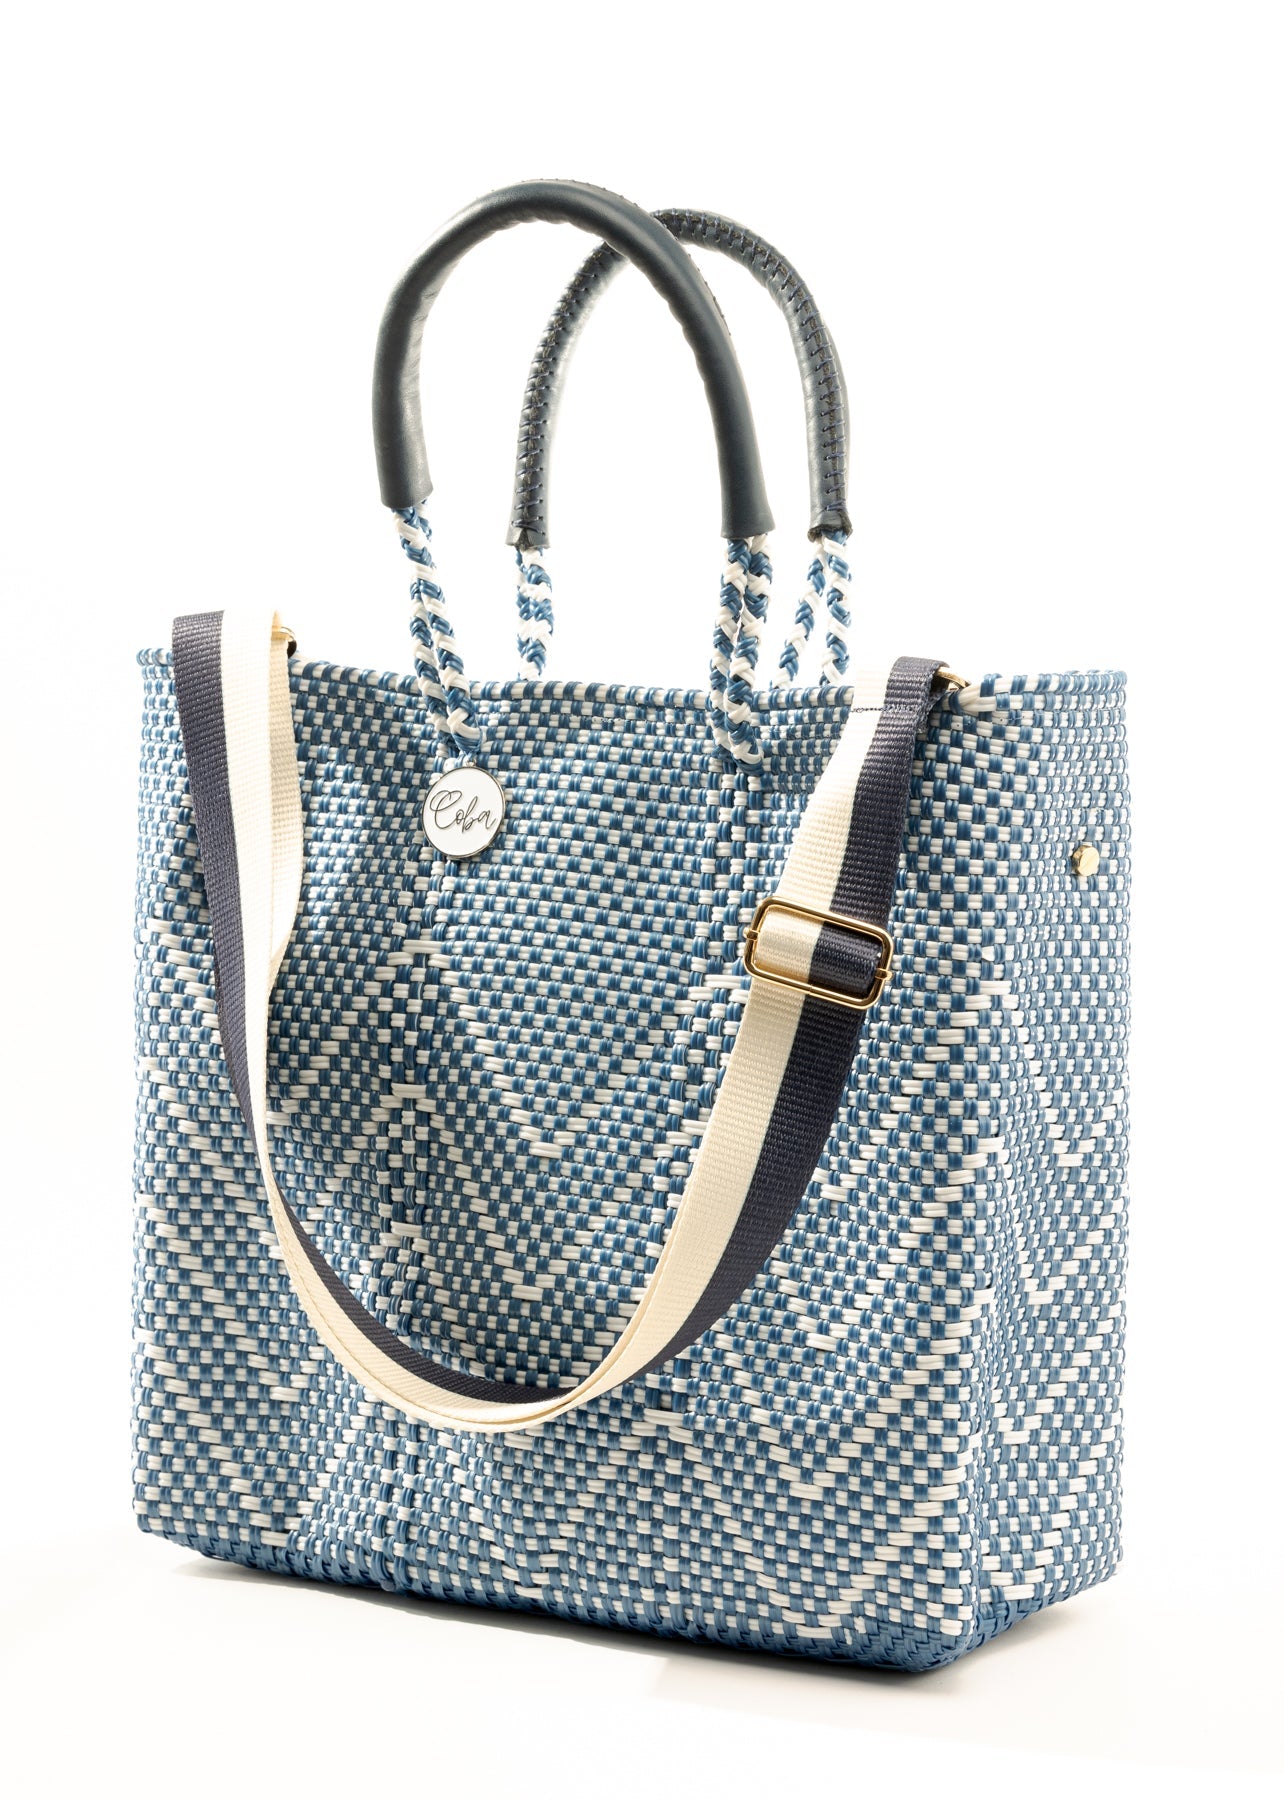 Blue and white chevron woven bucket bag made from recycled plastics featuring navy blue leather handles and a silver Coba medallion with option woven strap added